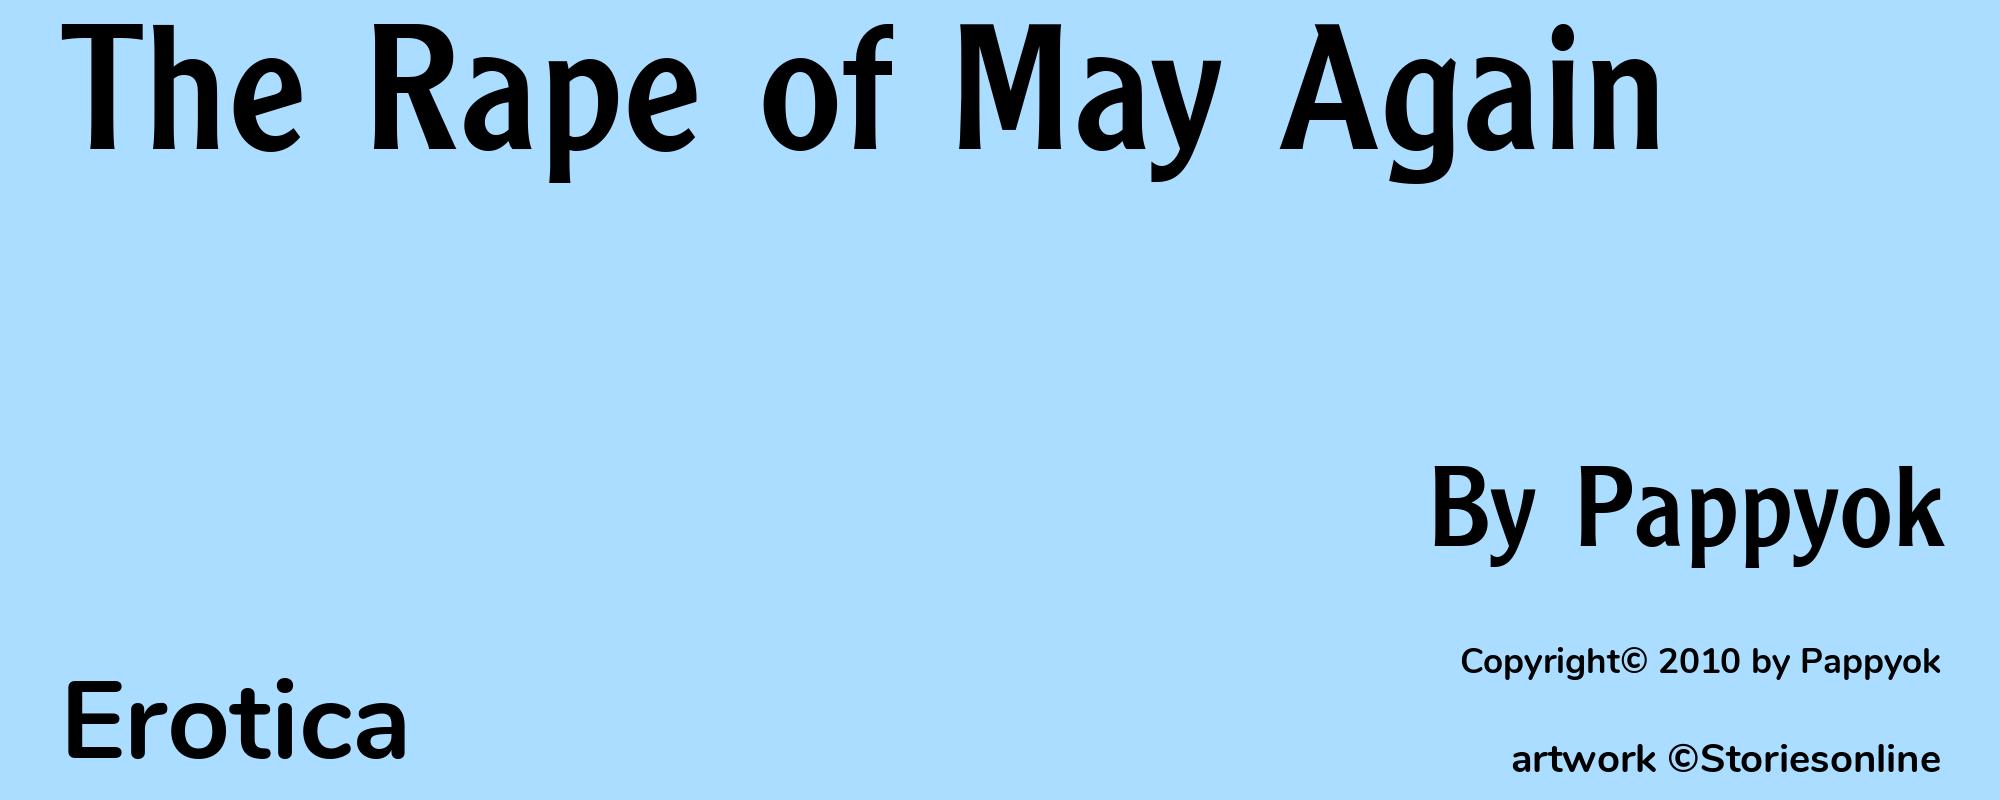 The Rape of May Again - Cover